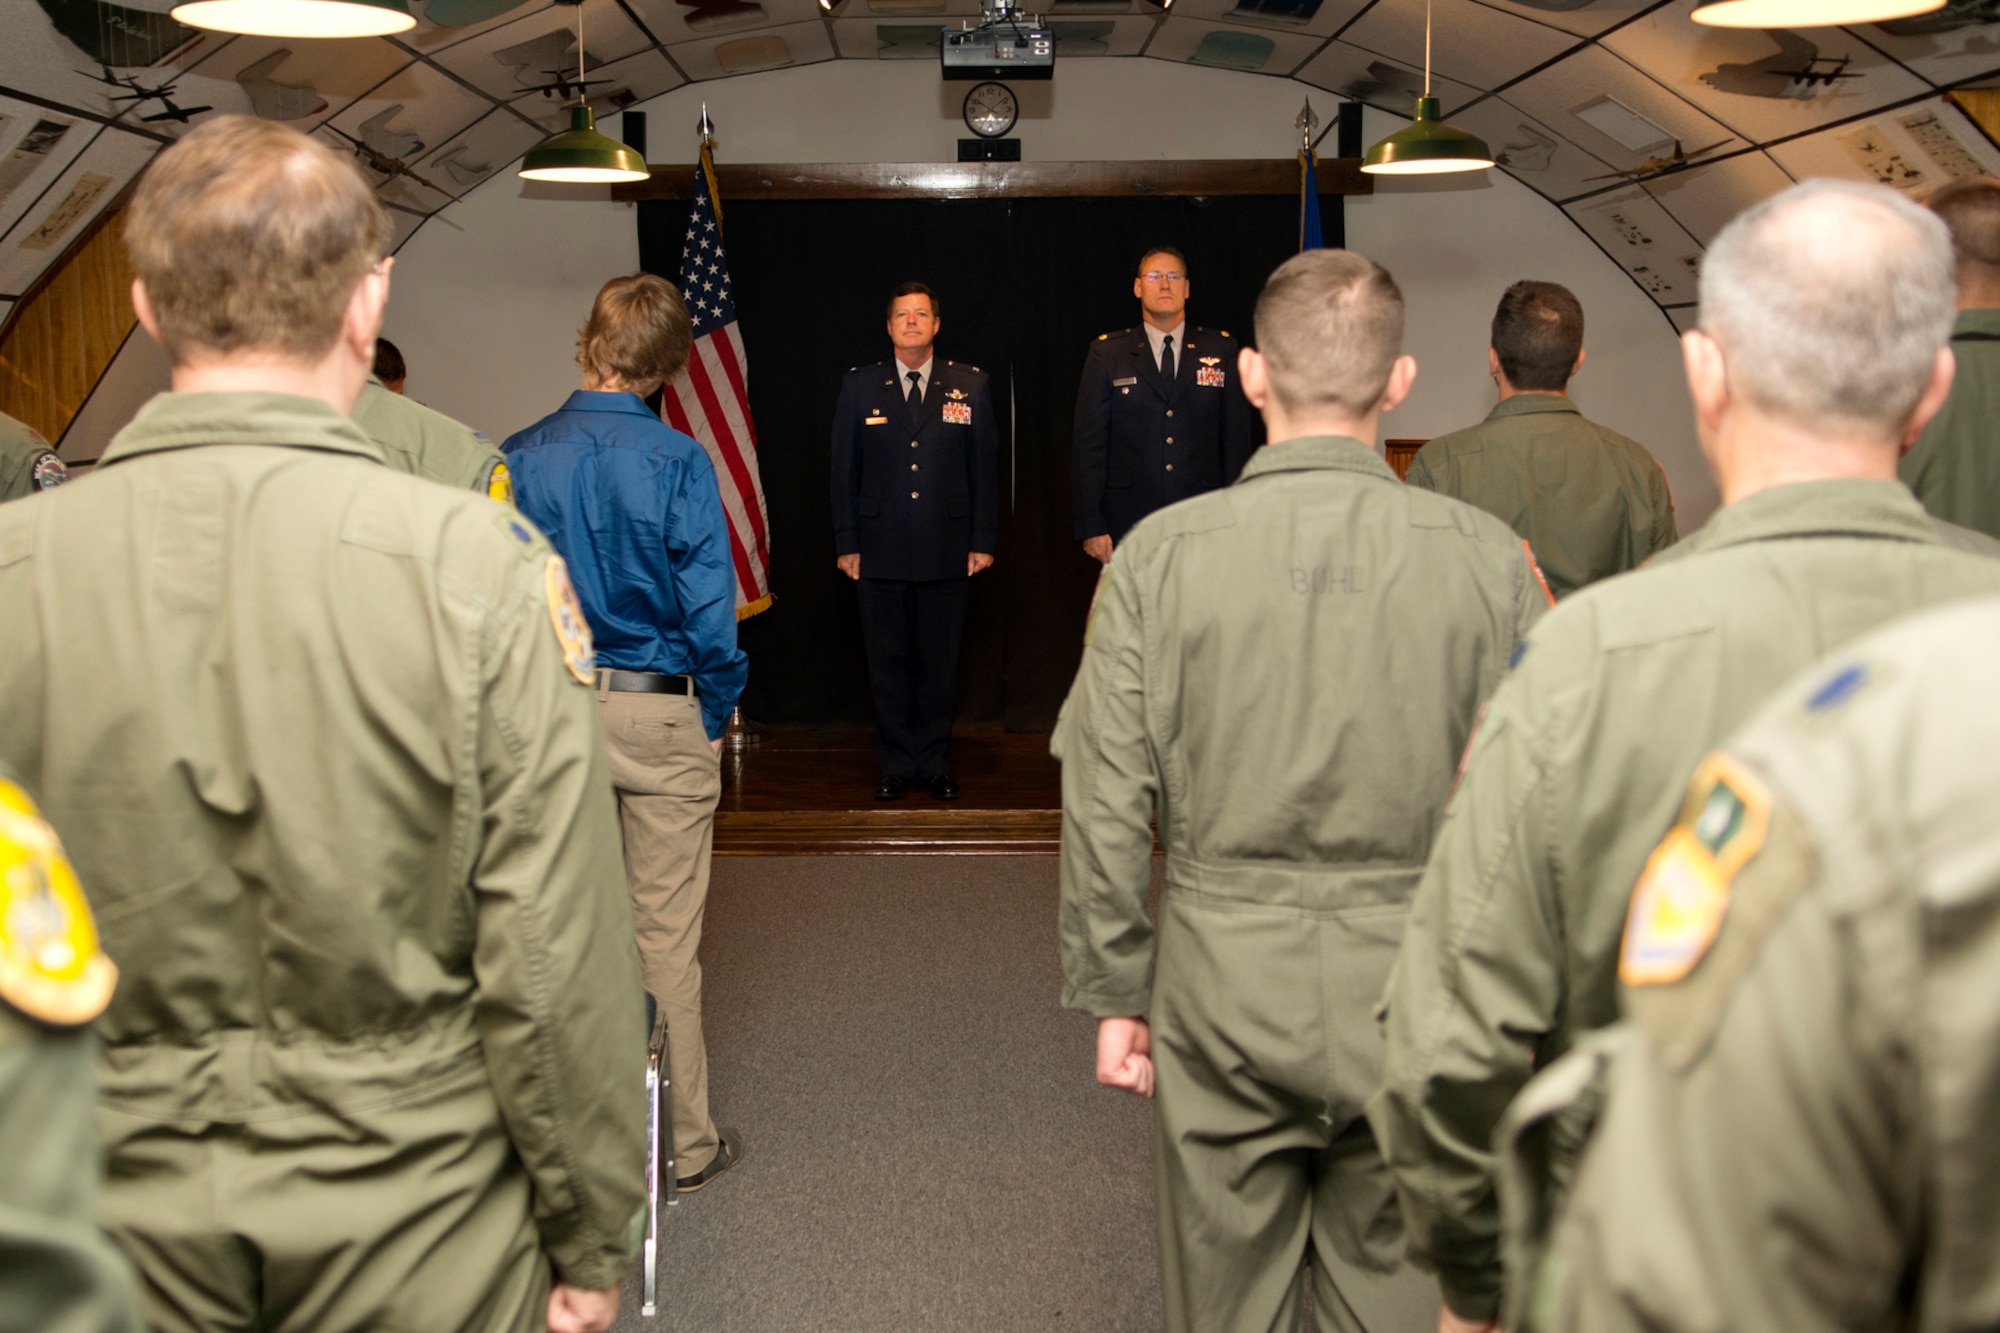 Attendees stand during the reading of the Promotion Citation during a Pinning On ceremony for U.S. Air Force Lt. Col. Joseph Hagans (right), Sept. 28, 2012, Barksdale Air Force Base, La. Hagan is a recent graduate of the B-52 Formal Training Unit and is assigned to the 343rd Bomb Squadron at Barksdale. (U.S. Air Force photo by Master Sgt. Greg Steele/Released)